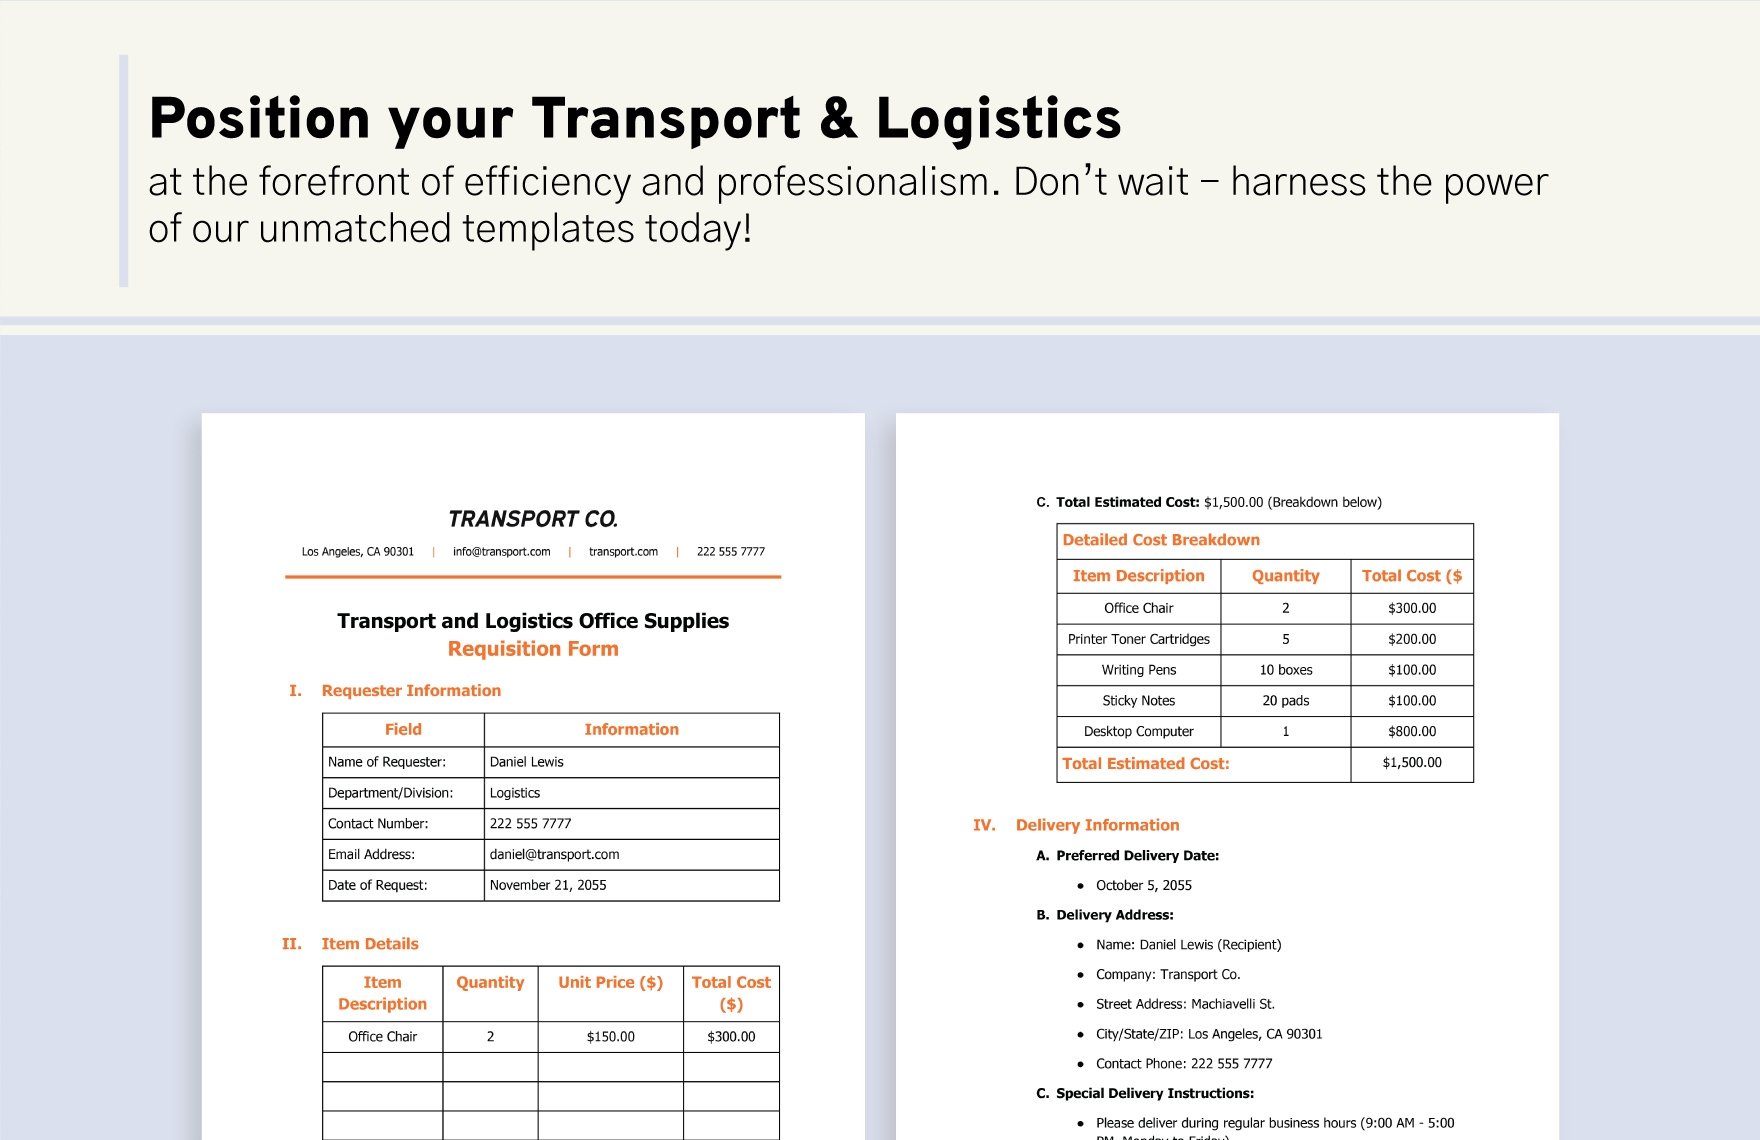 Transport and Logistics Office Supplies Requisition Form Template